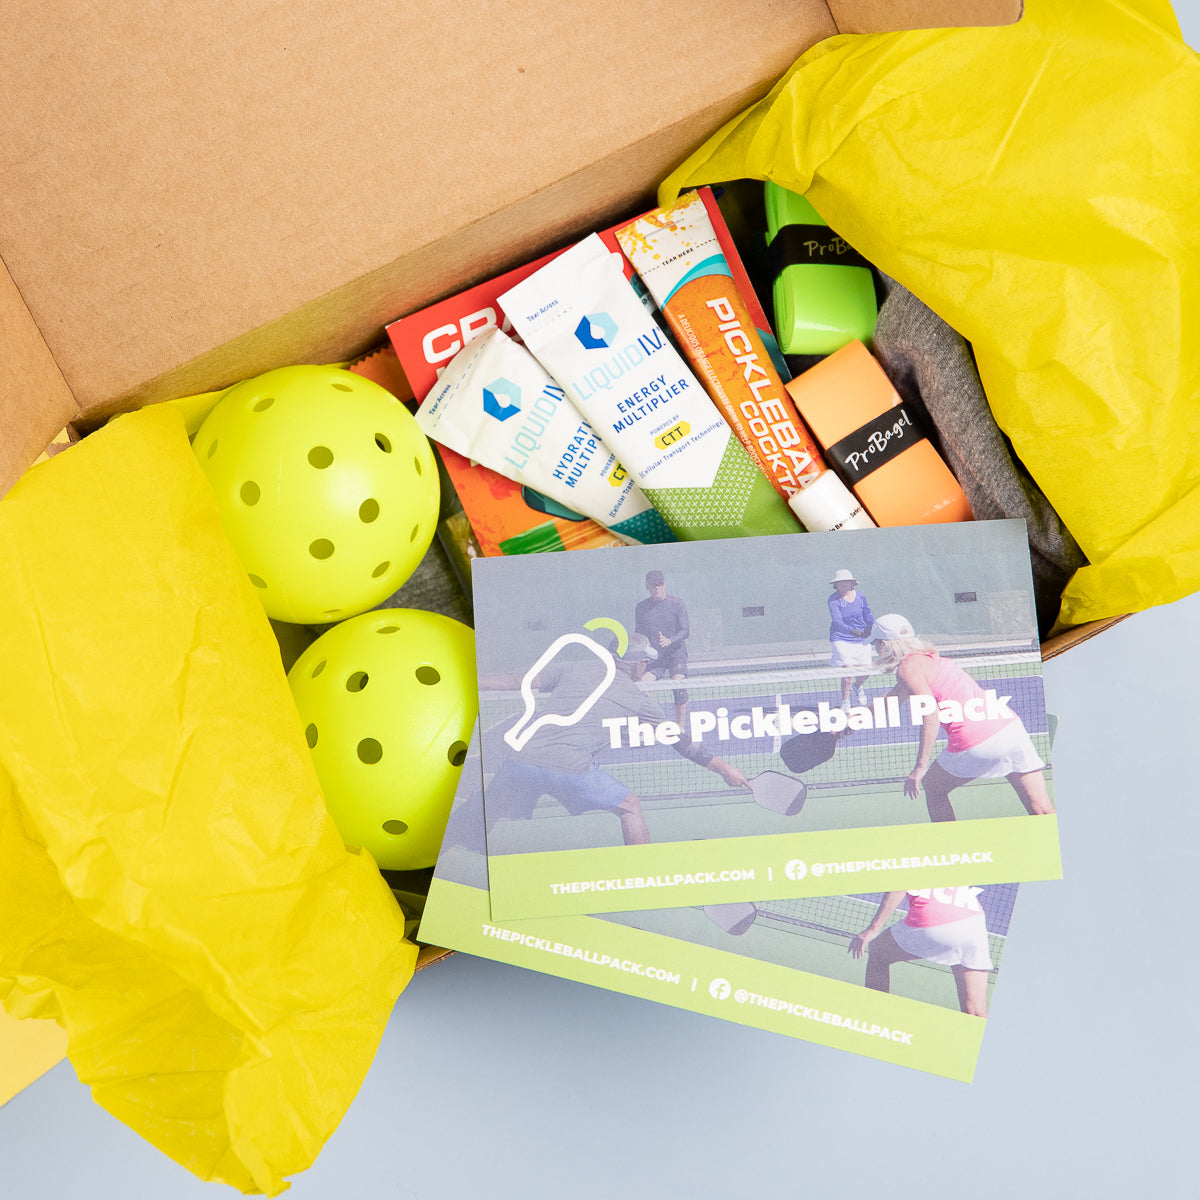 The Pickleball Pack Box- 6 mos subscription